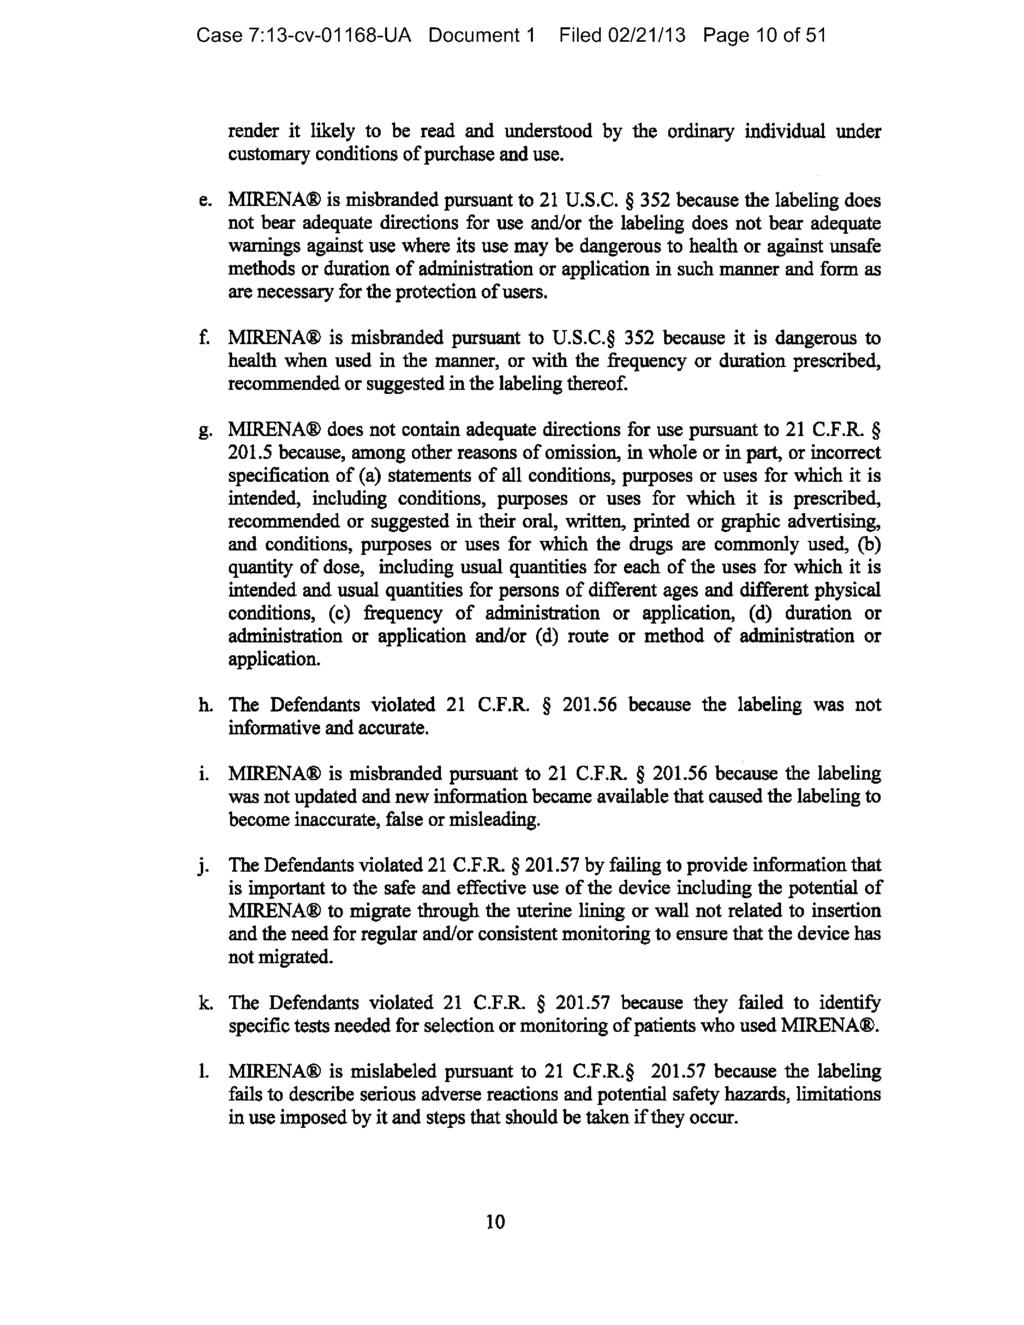 Case 7:13-cv-01168-UA Document 1 Filed 02/21/13 Page 10 of 51 render it likely to be read and understood by the ordinary individual under customary conditions of purchase and use. e.